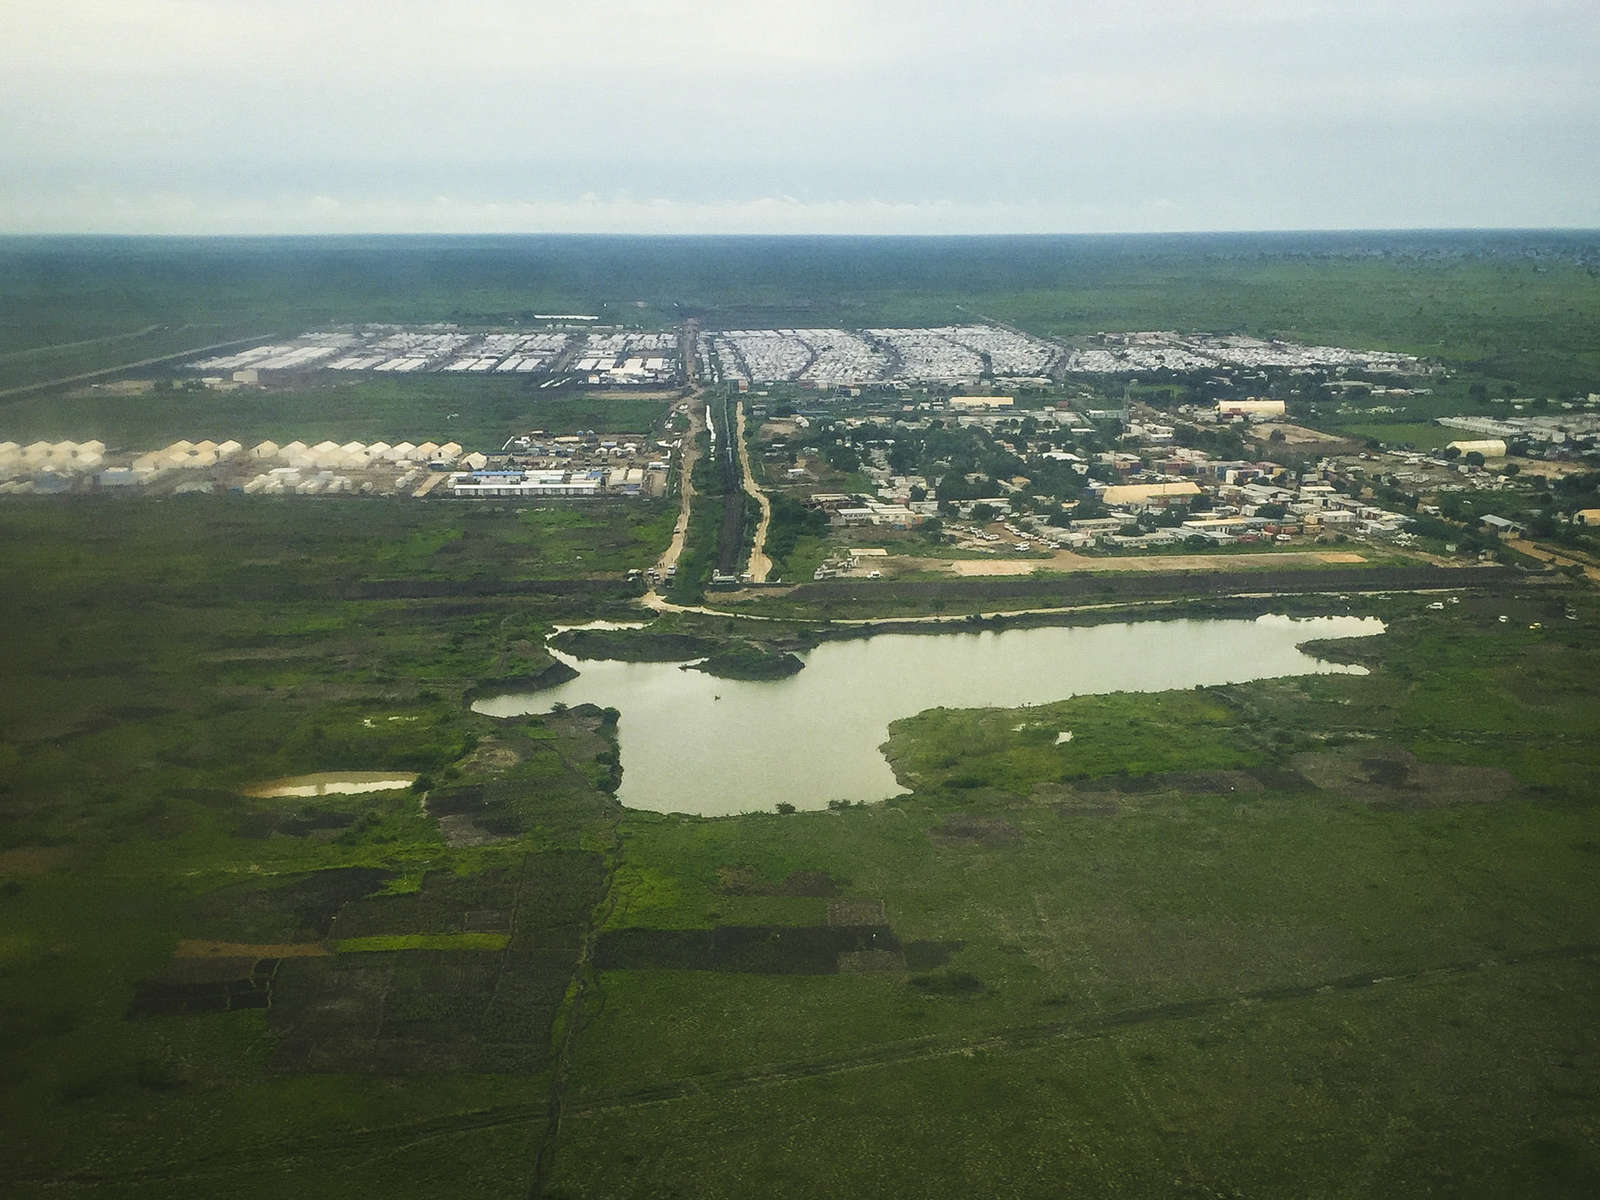 An aerial view of the United Nations Mission in South Sudan base and humanitarian hub (foreground) and the Protection of Civilians (POC) site (background) in Malakal, South Sudan on July 7, 2016. 